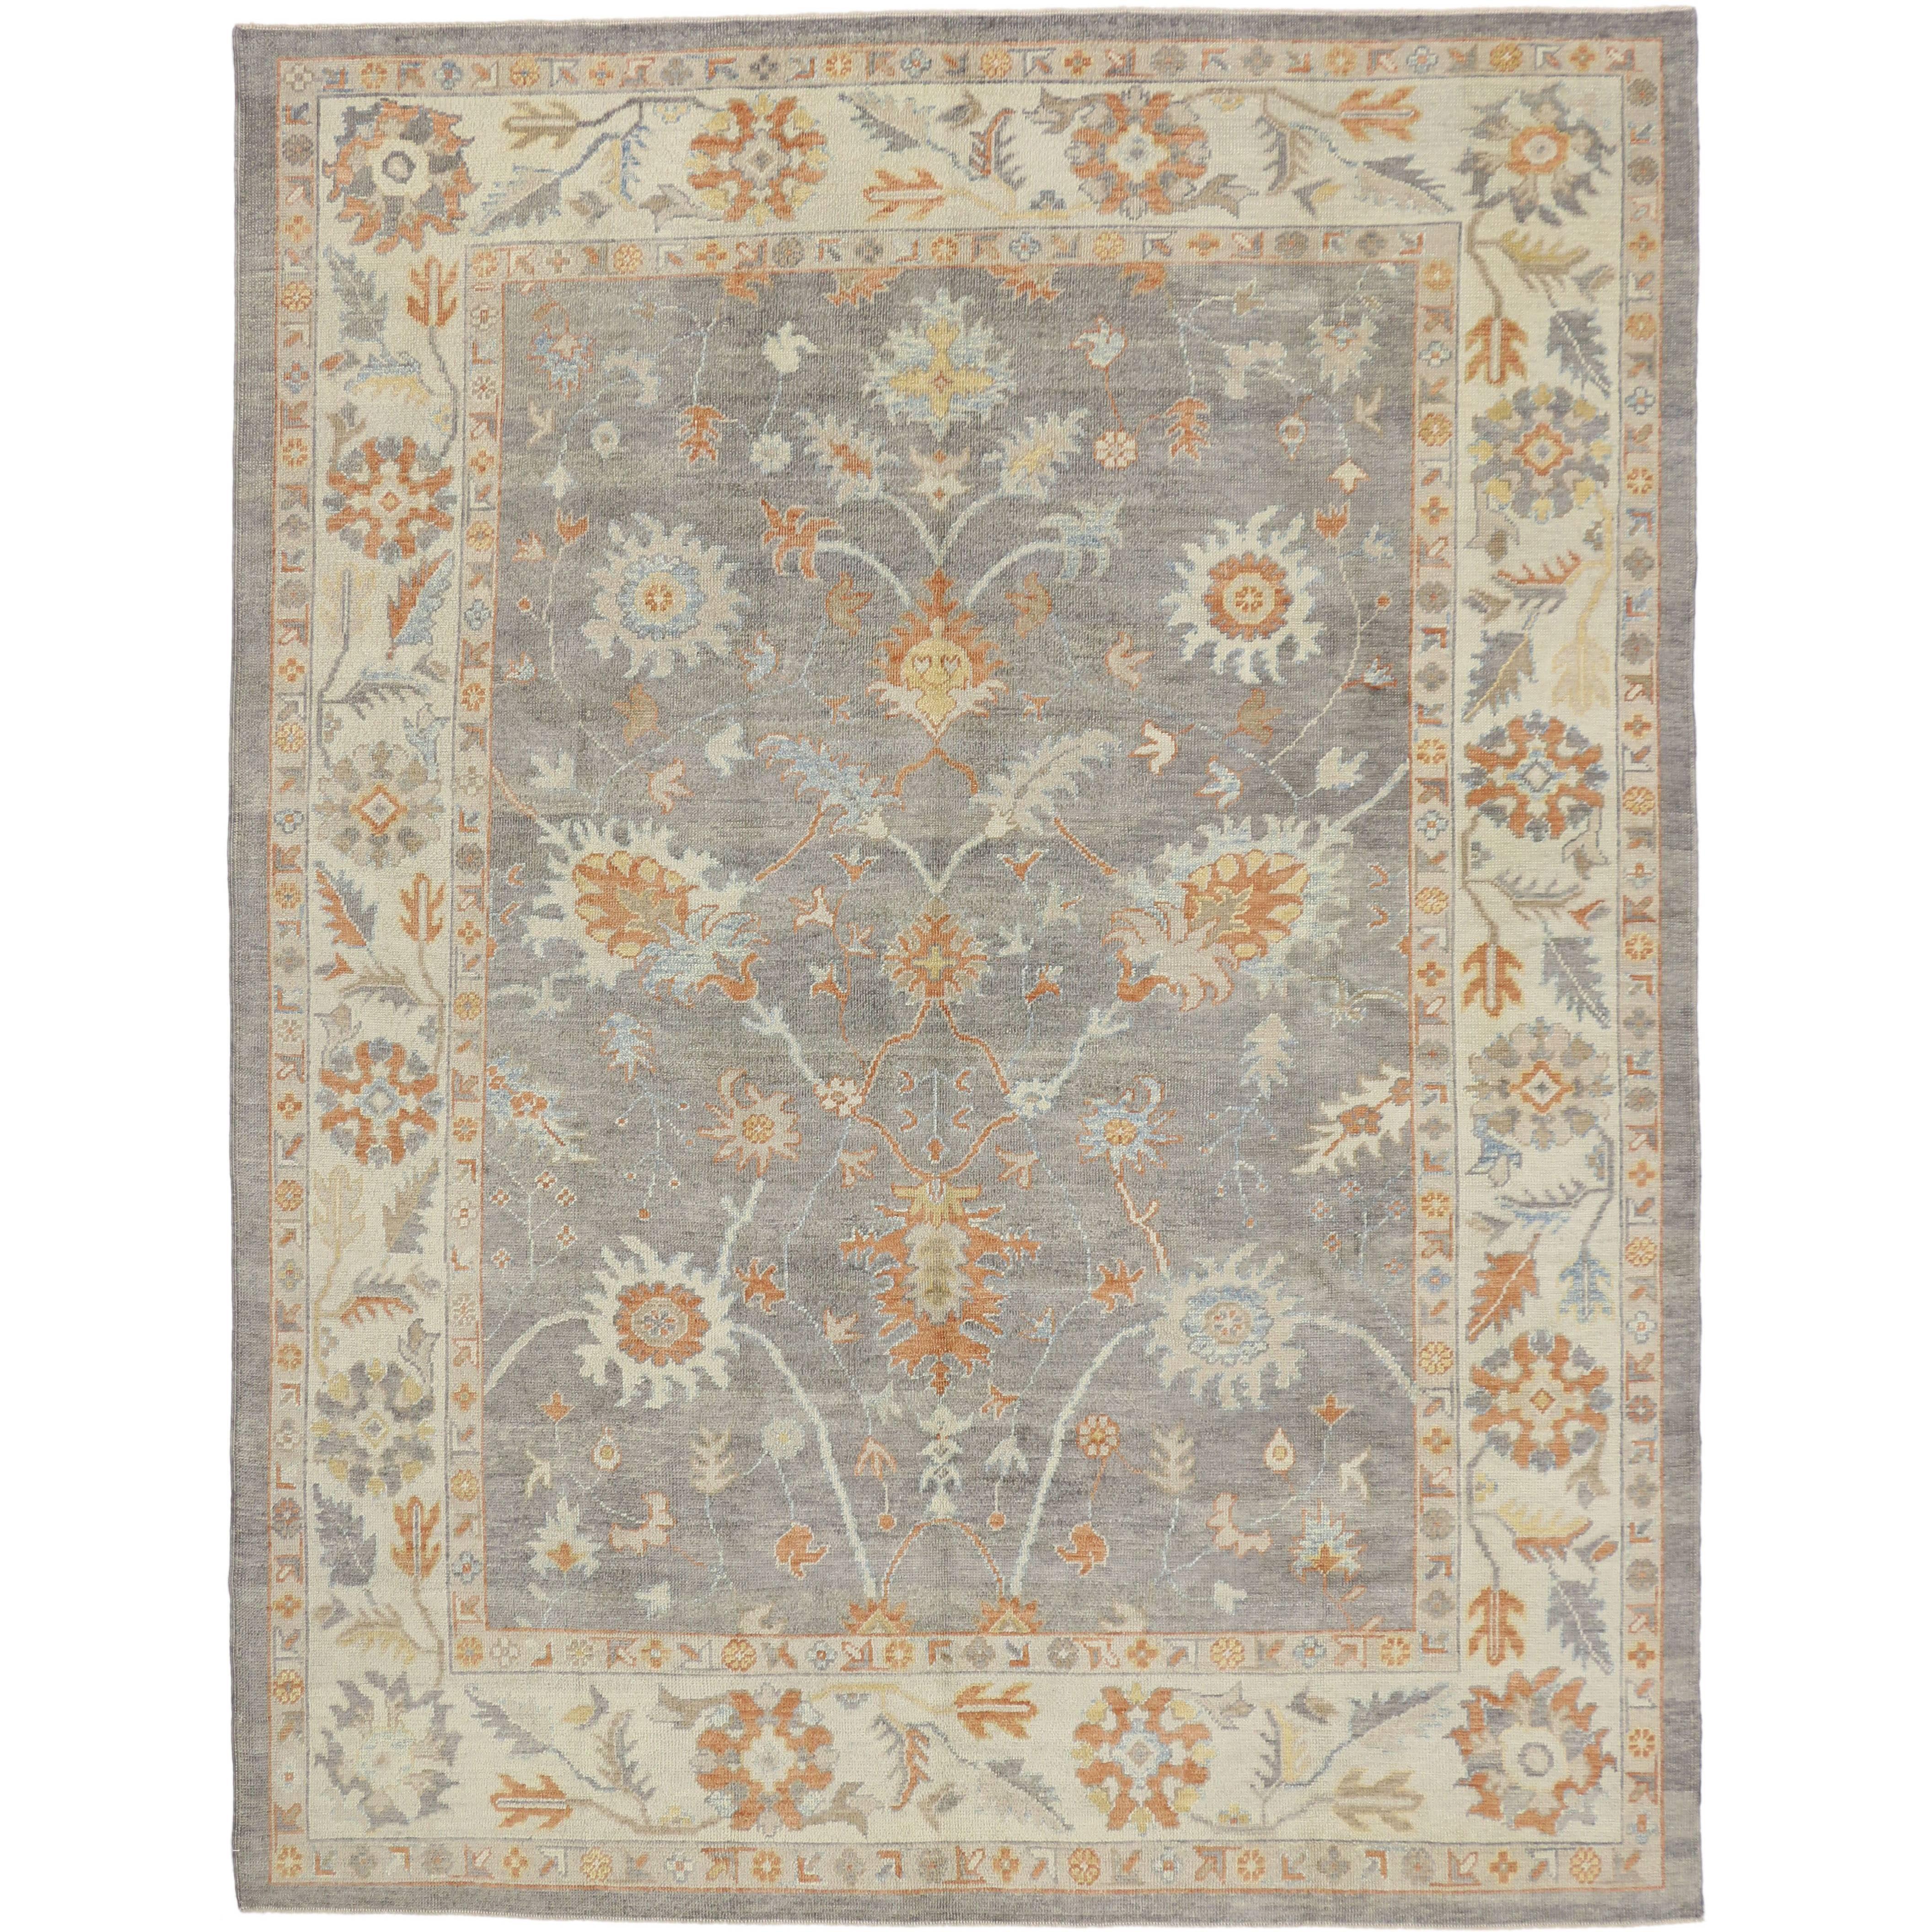 Contemporary Turkish Oushak Rug with Neutral Colors and Transitional Style